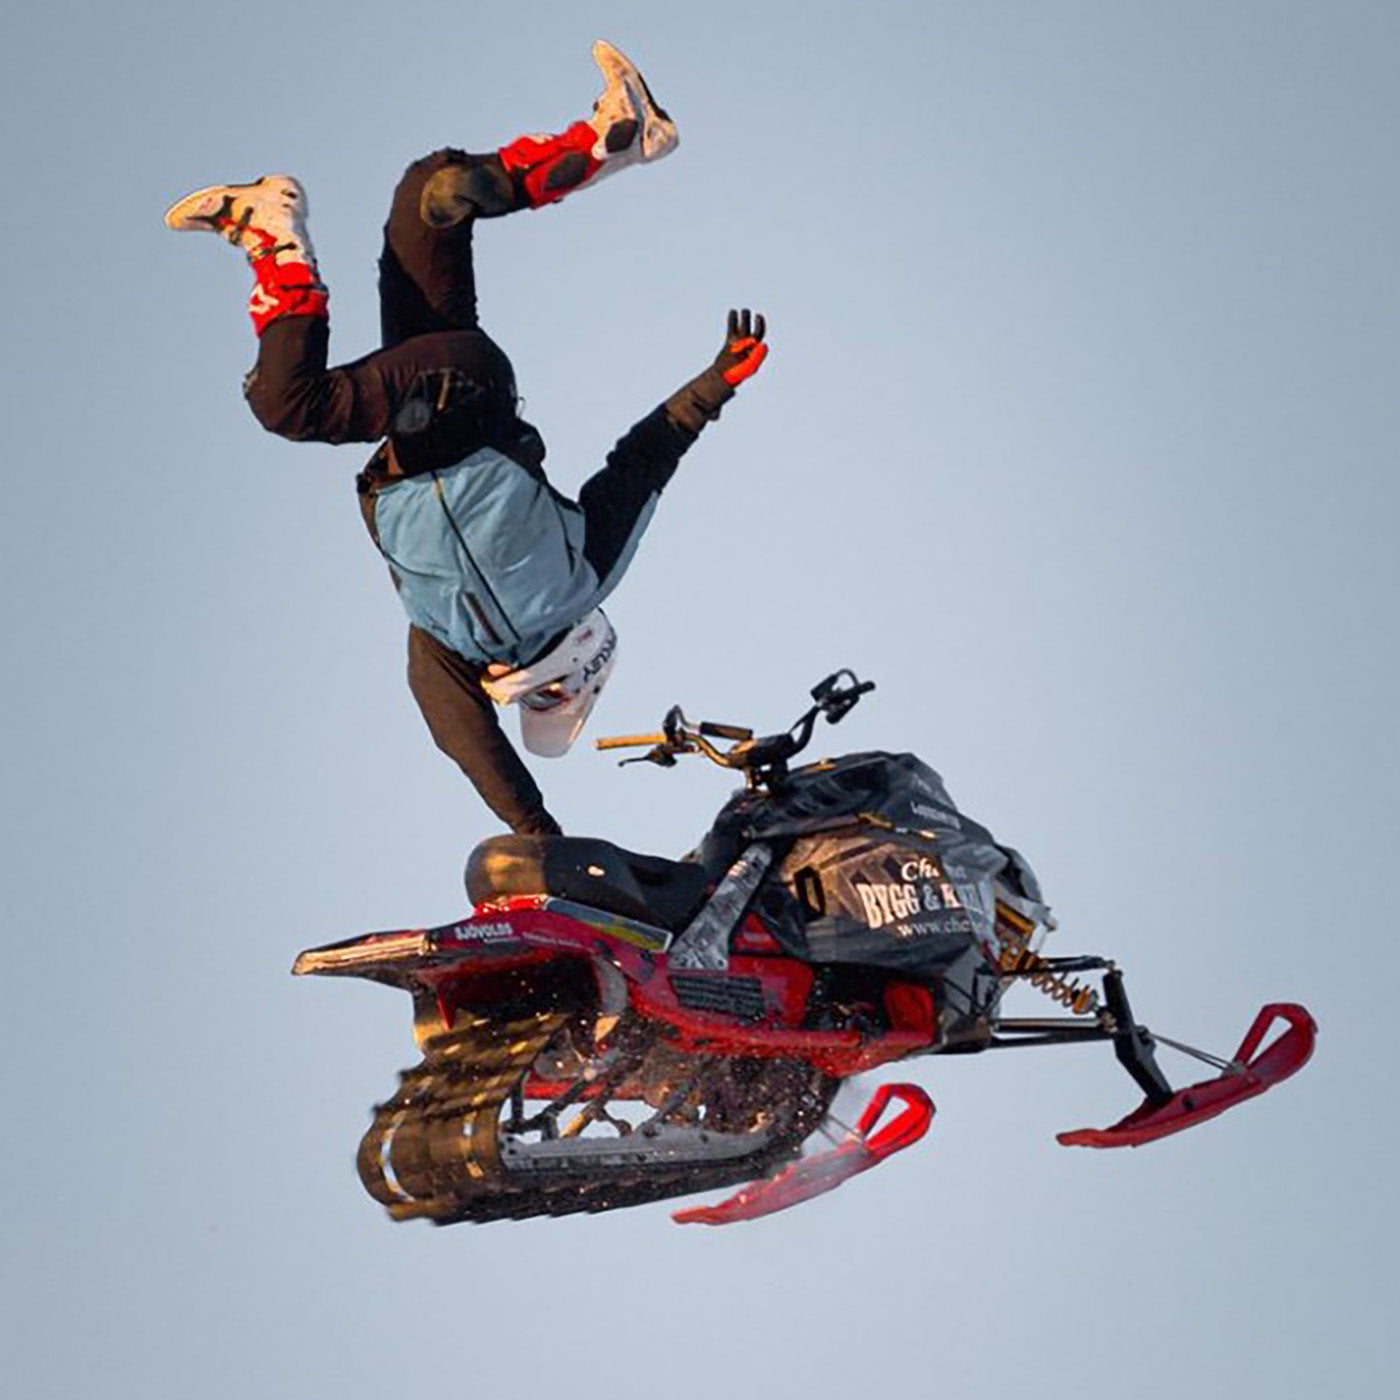 Marcus Ohlsson midair on sled with all-red C&A Pro skis